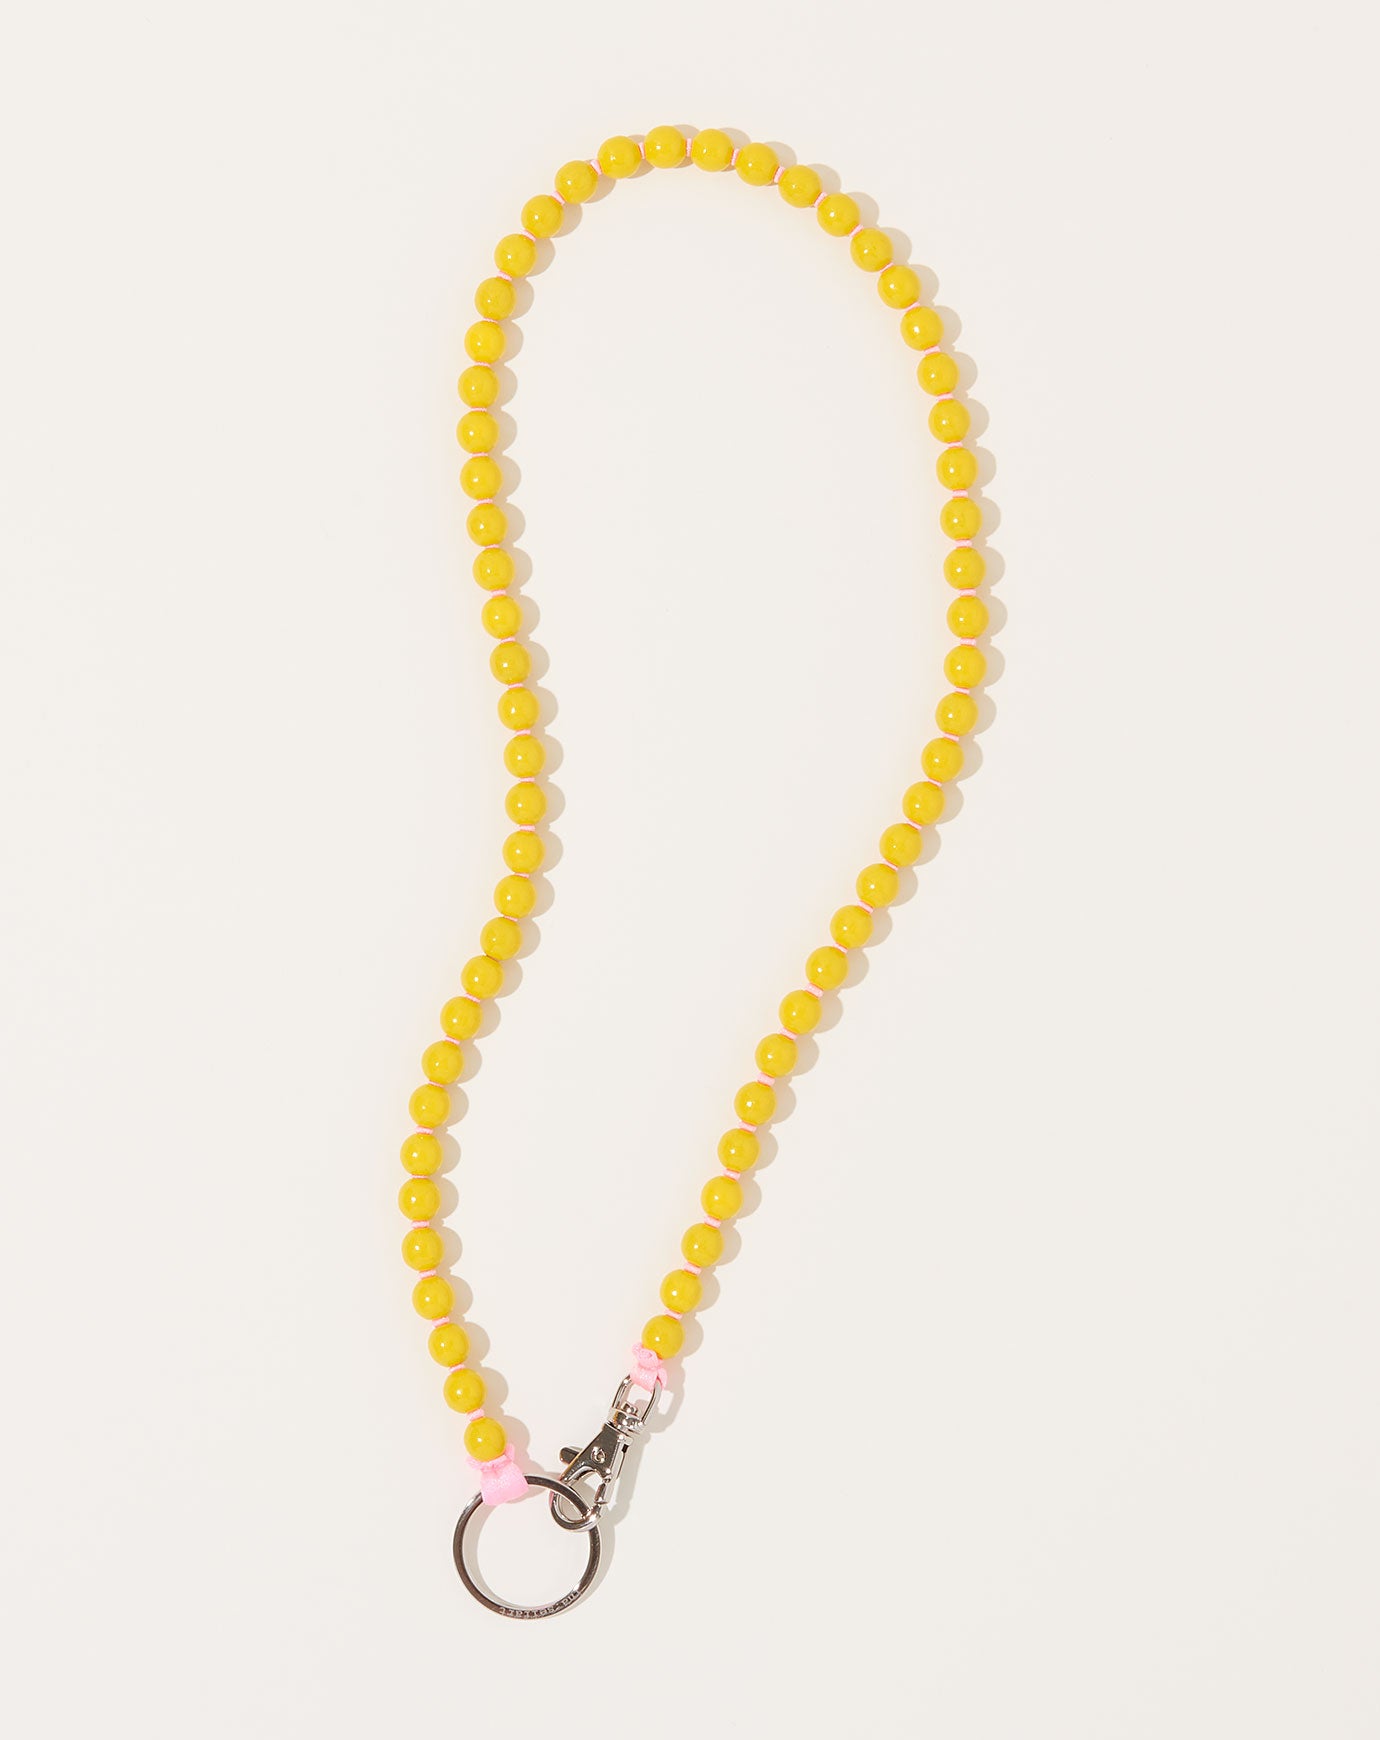 Ina Seifart Perlen Long Keyholder in Yellow on Rose